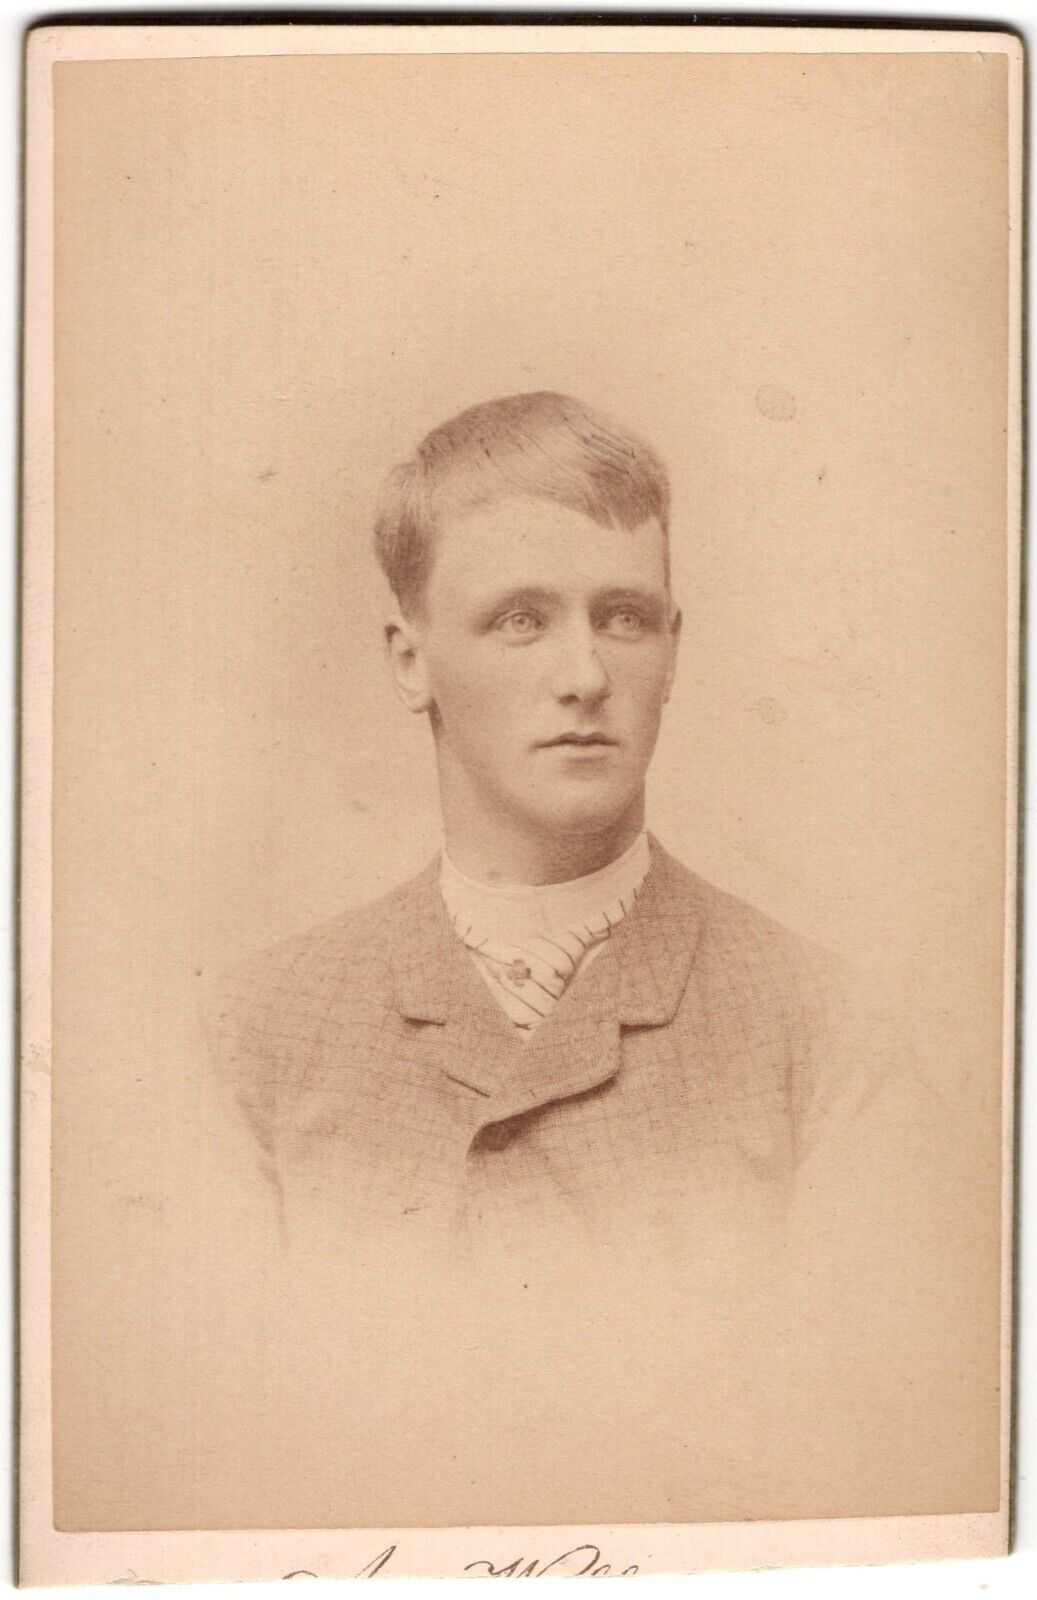 CIRCA 1880s CDV AUG. WAHLSTROM YOUNG MAN IN SUIT FALUN SWEDEN